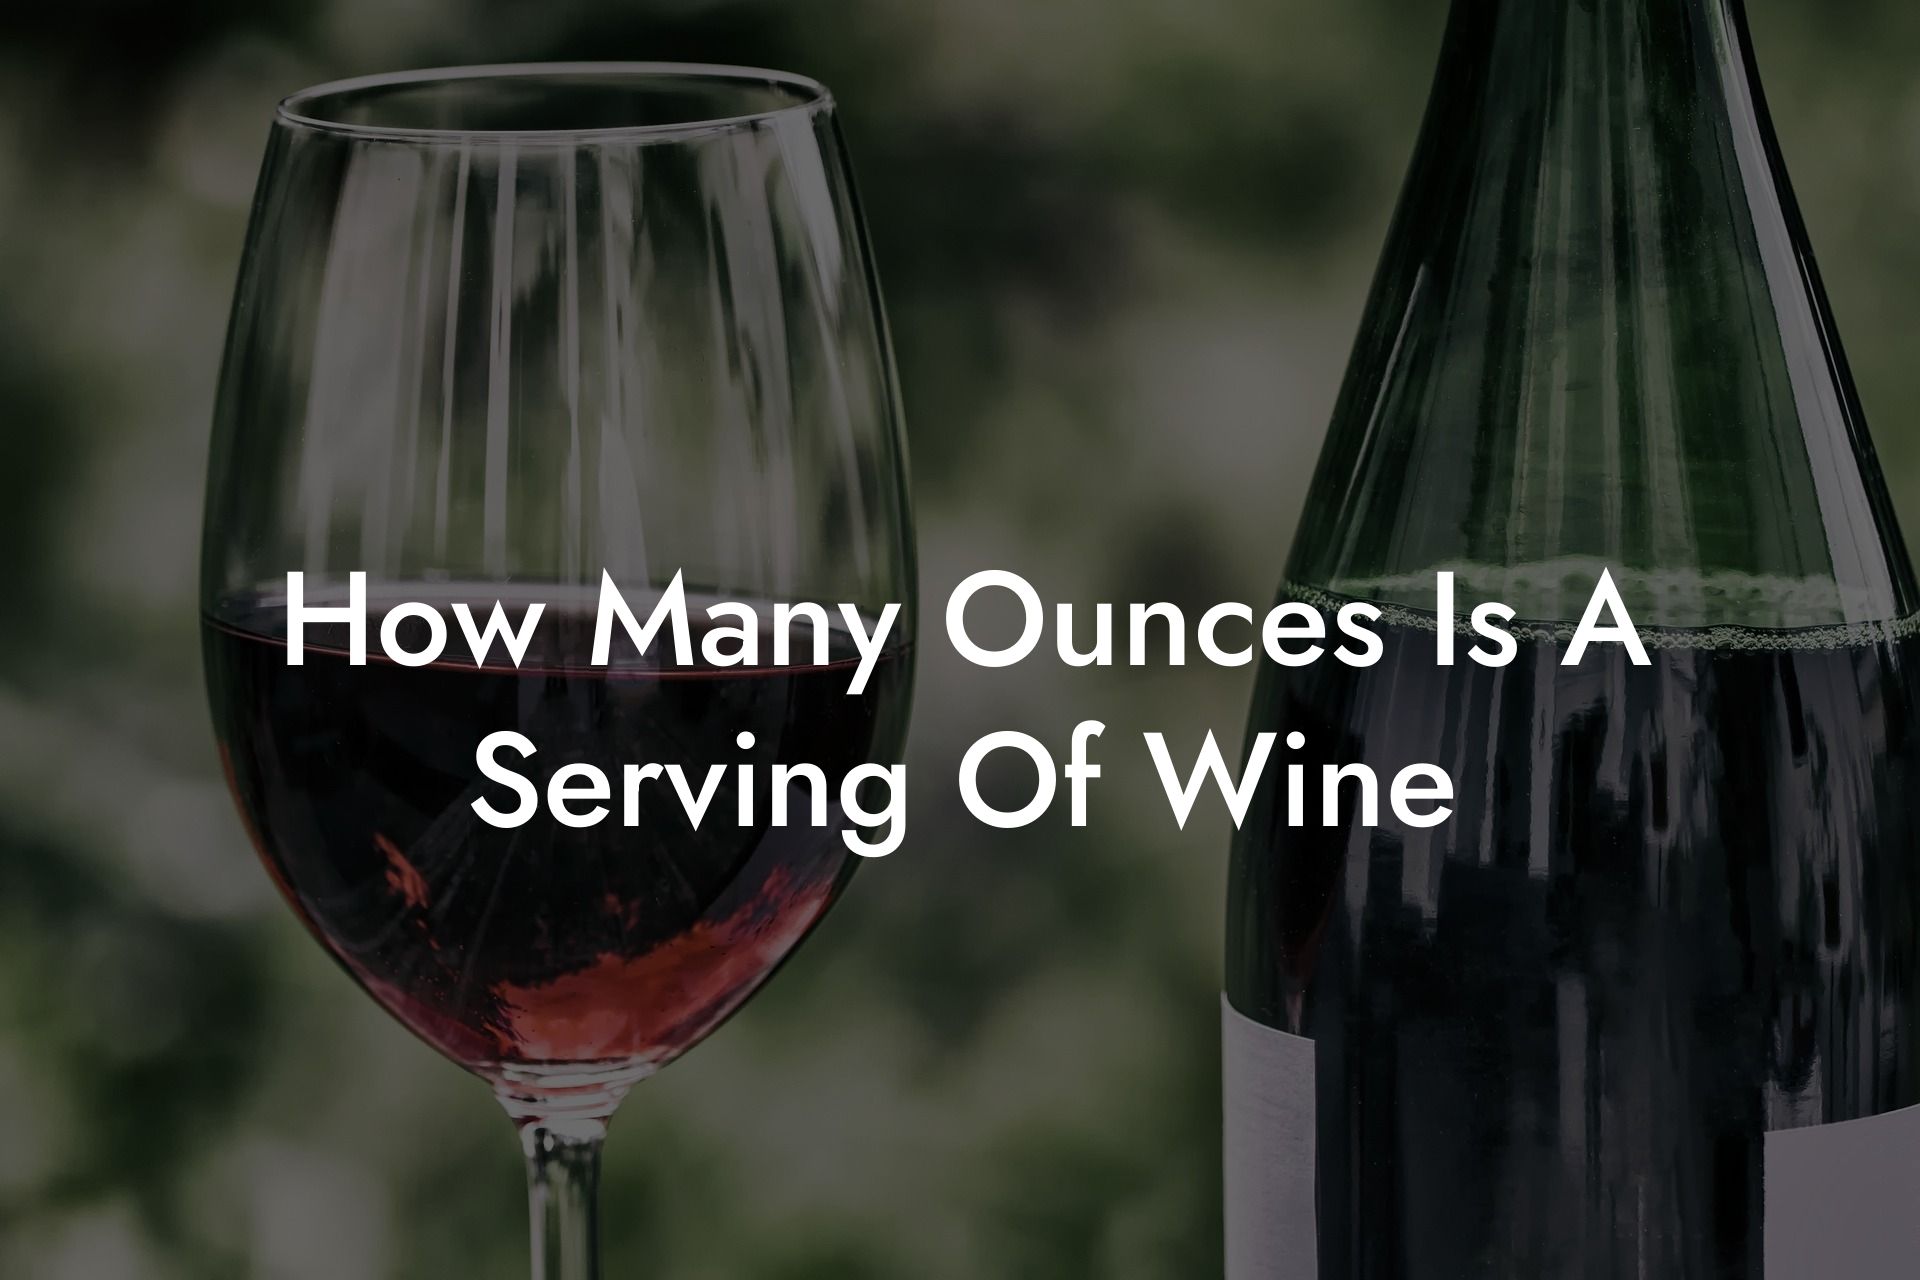 How Many Ounces Is A Serving Of Wine